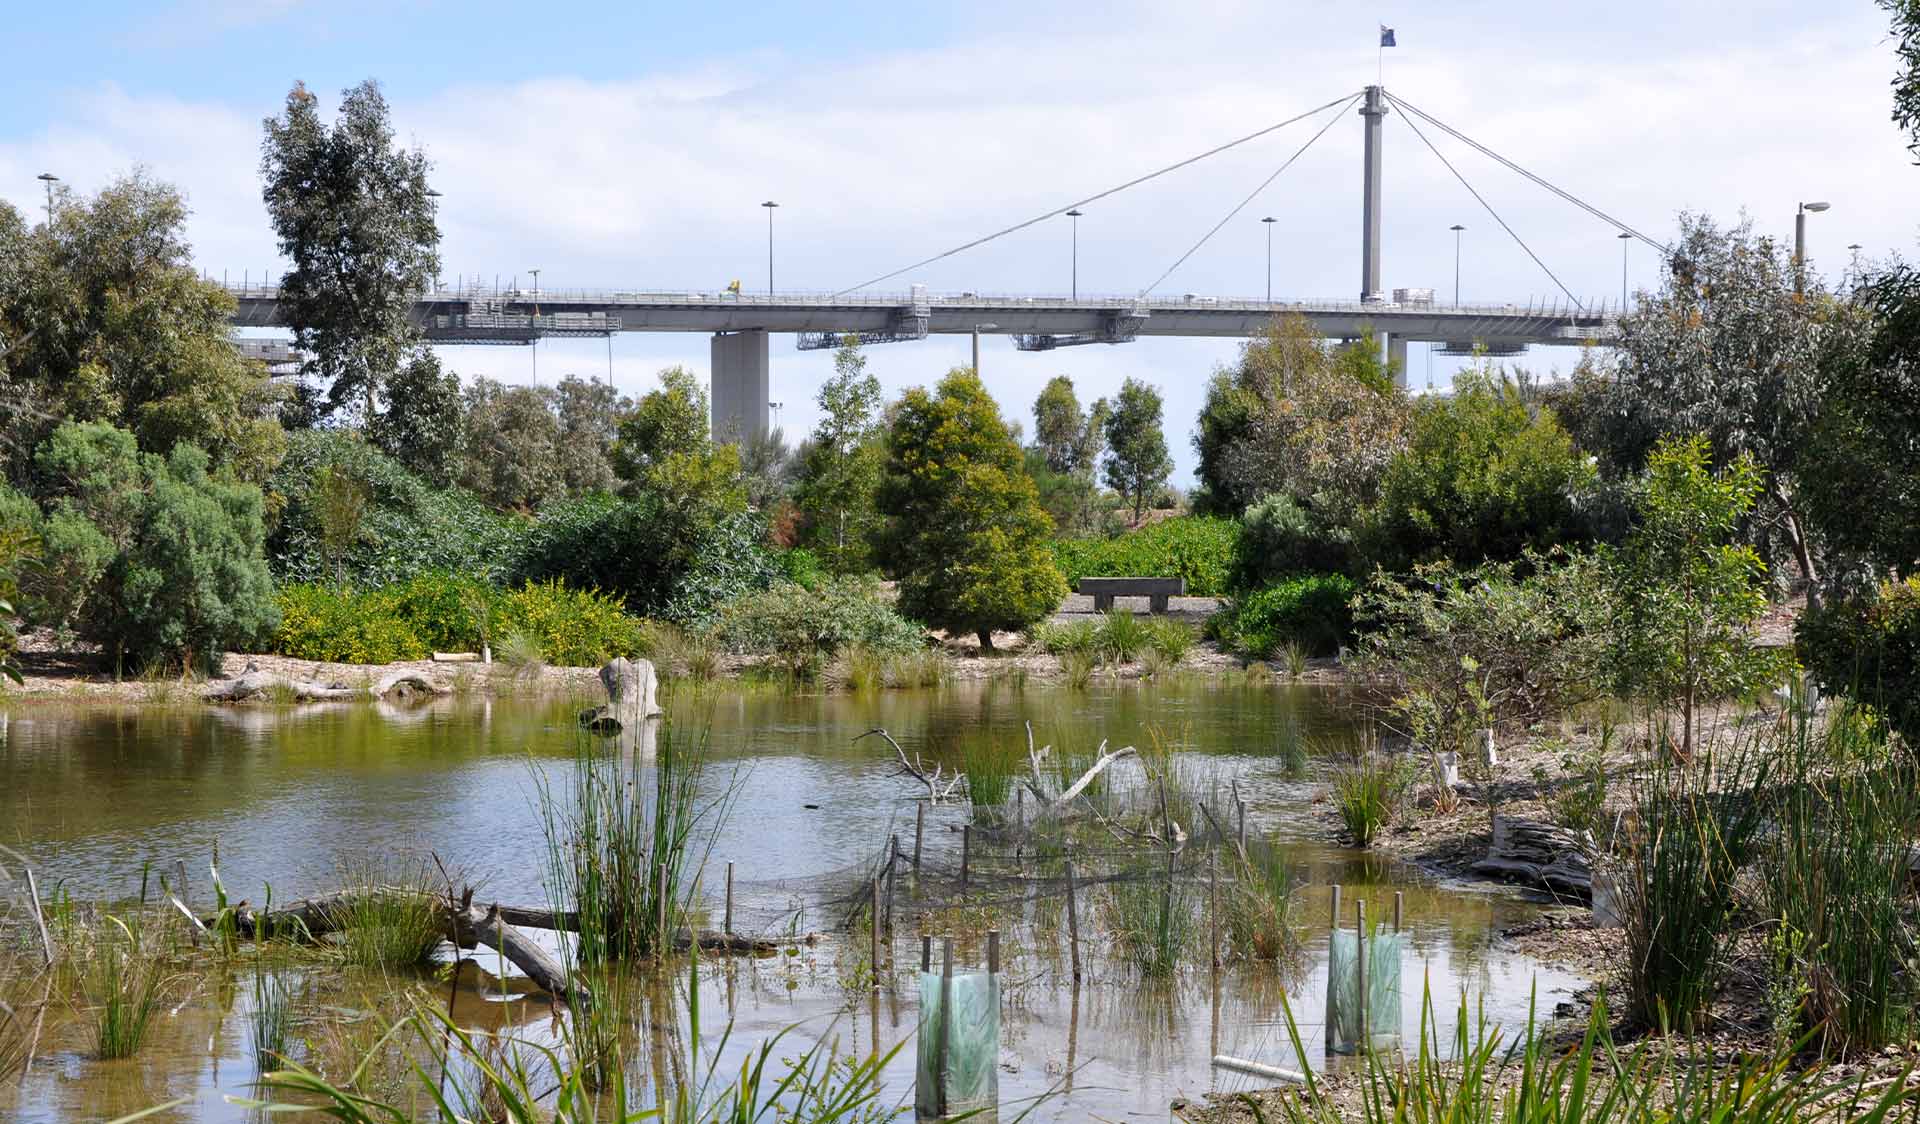 The wetlands at Westgate Park in front of the Westgate Bridge